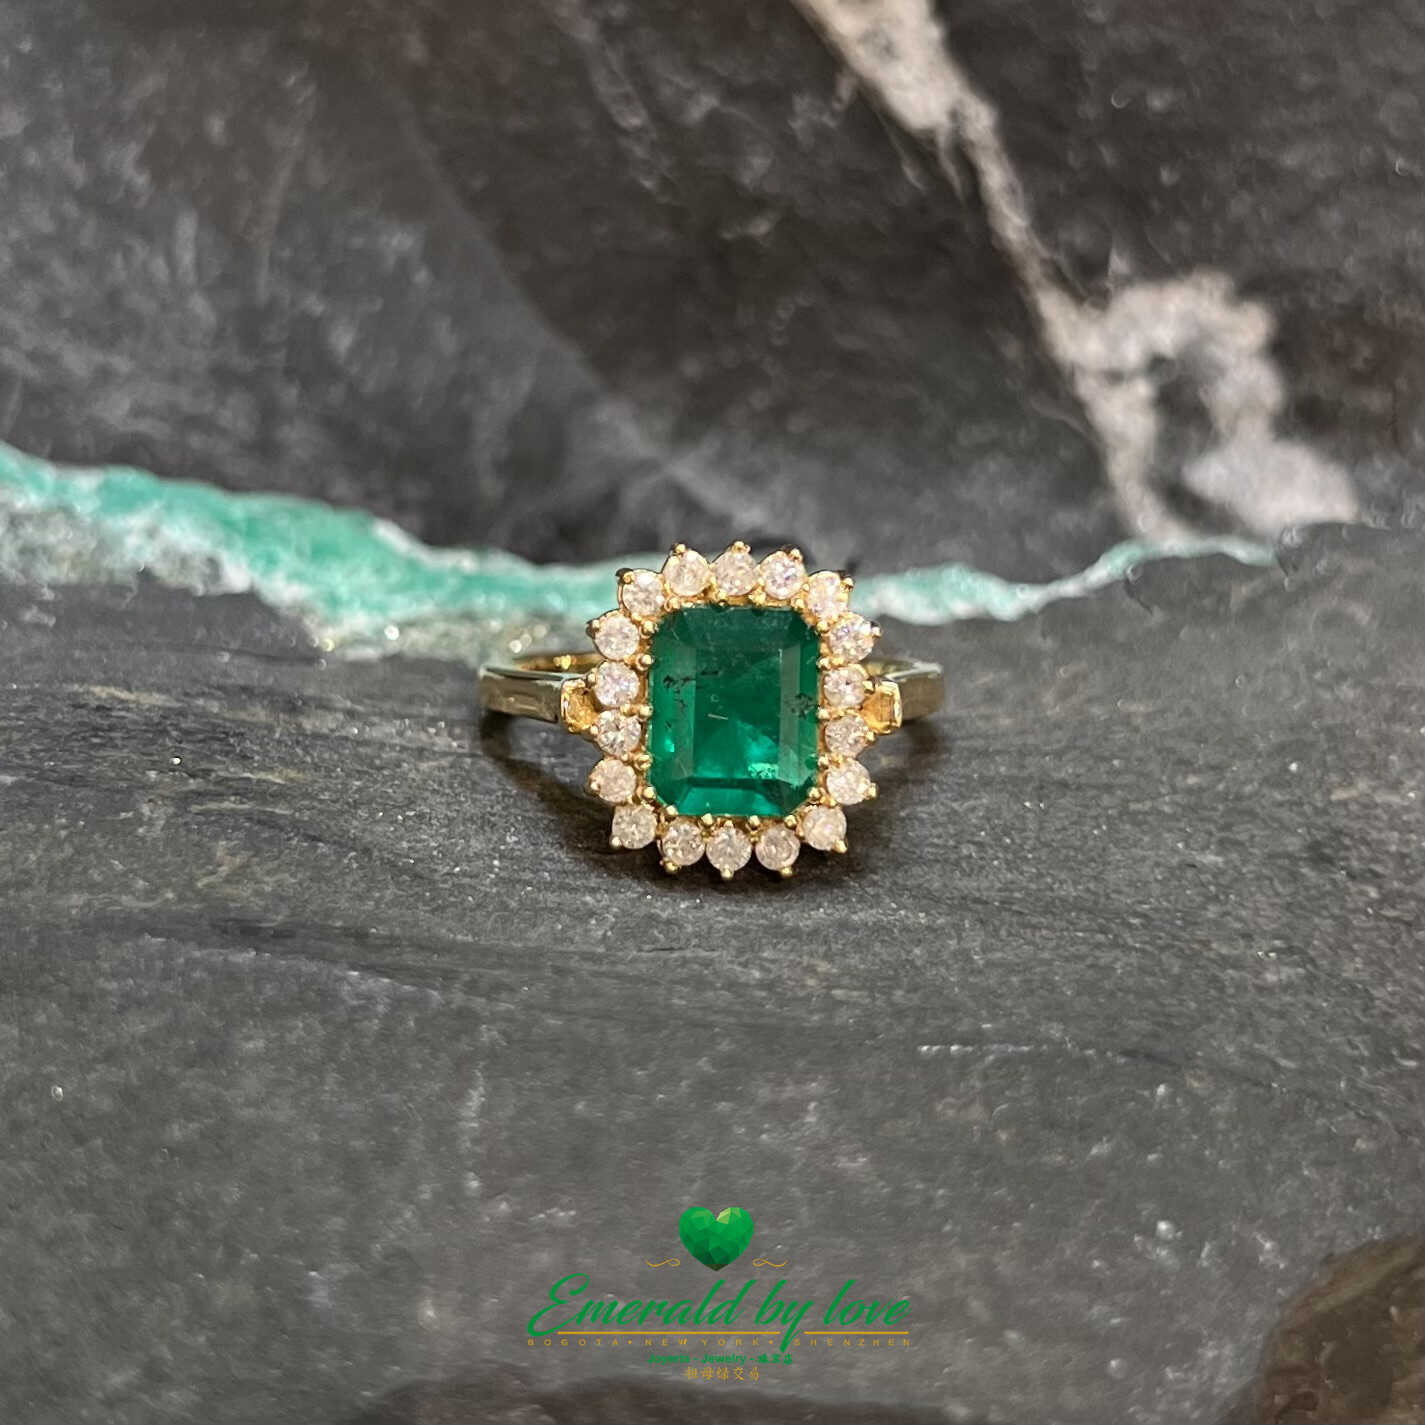 Marquise-Cut Emerald Ring with Central Gemstone and Diamond Halo